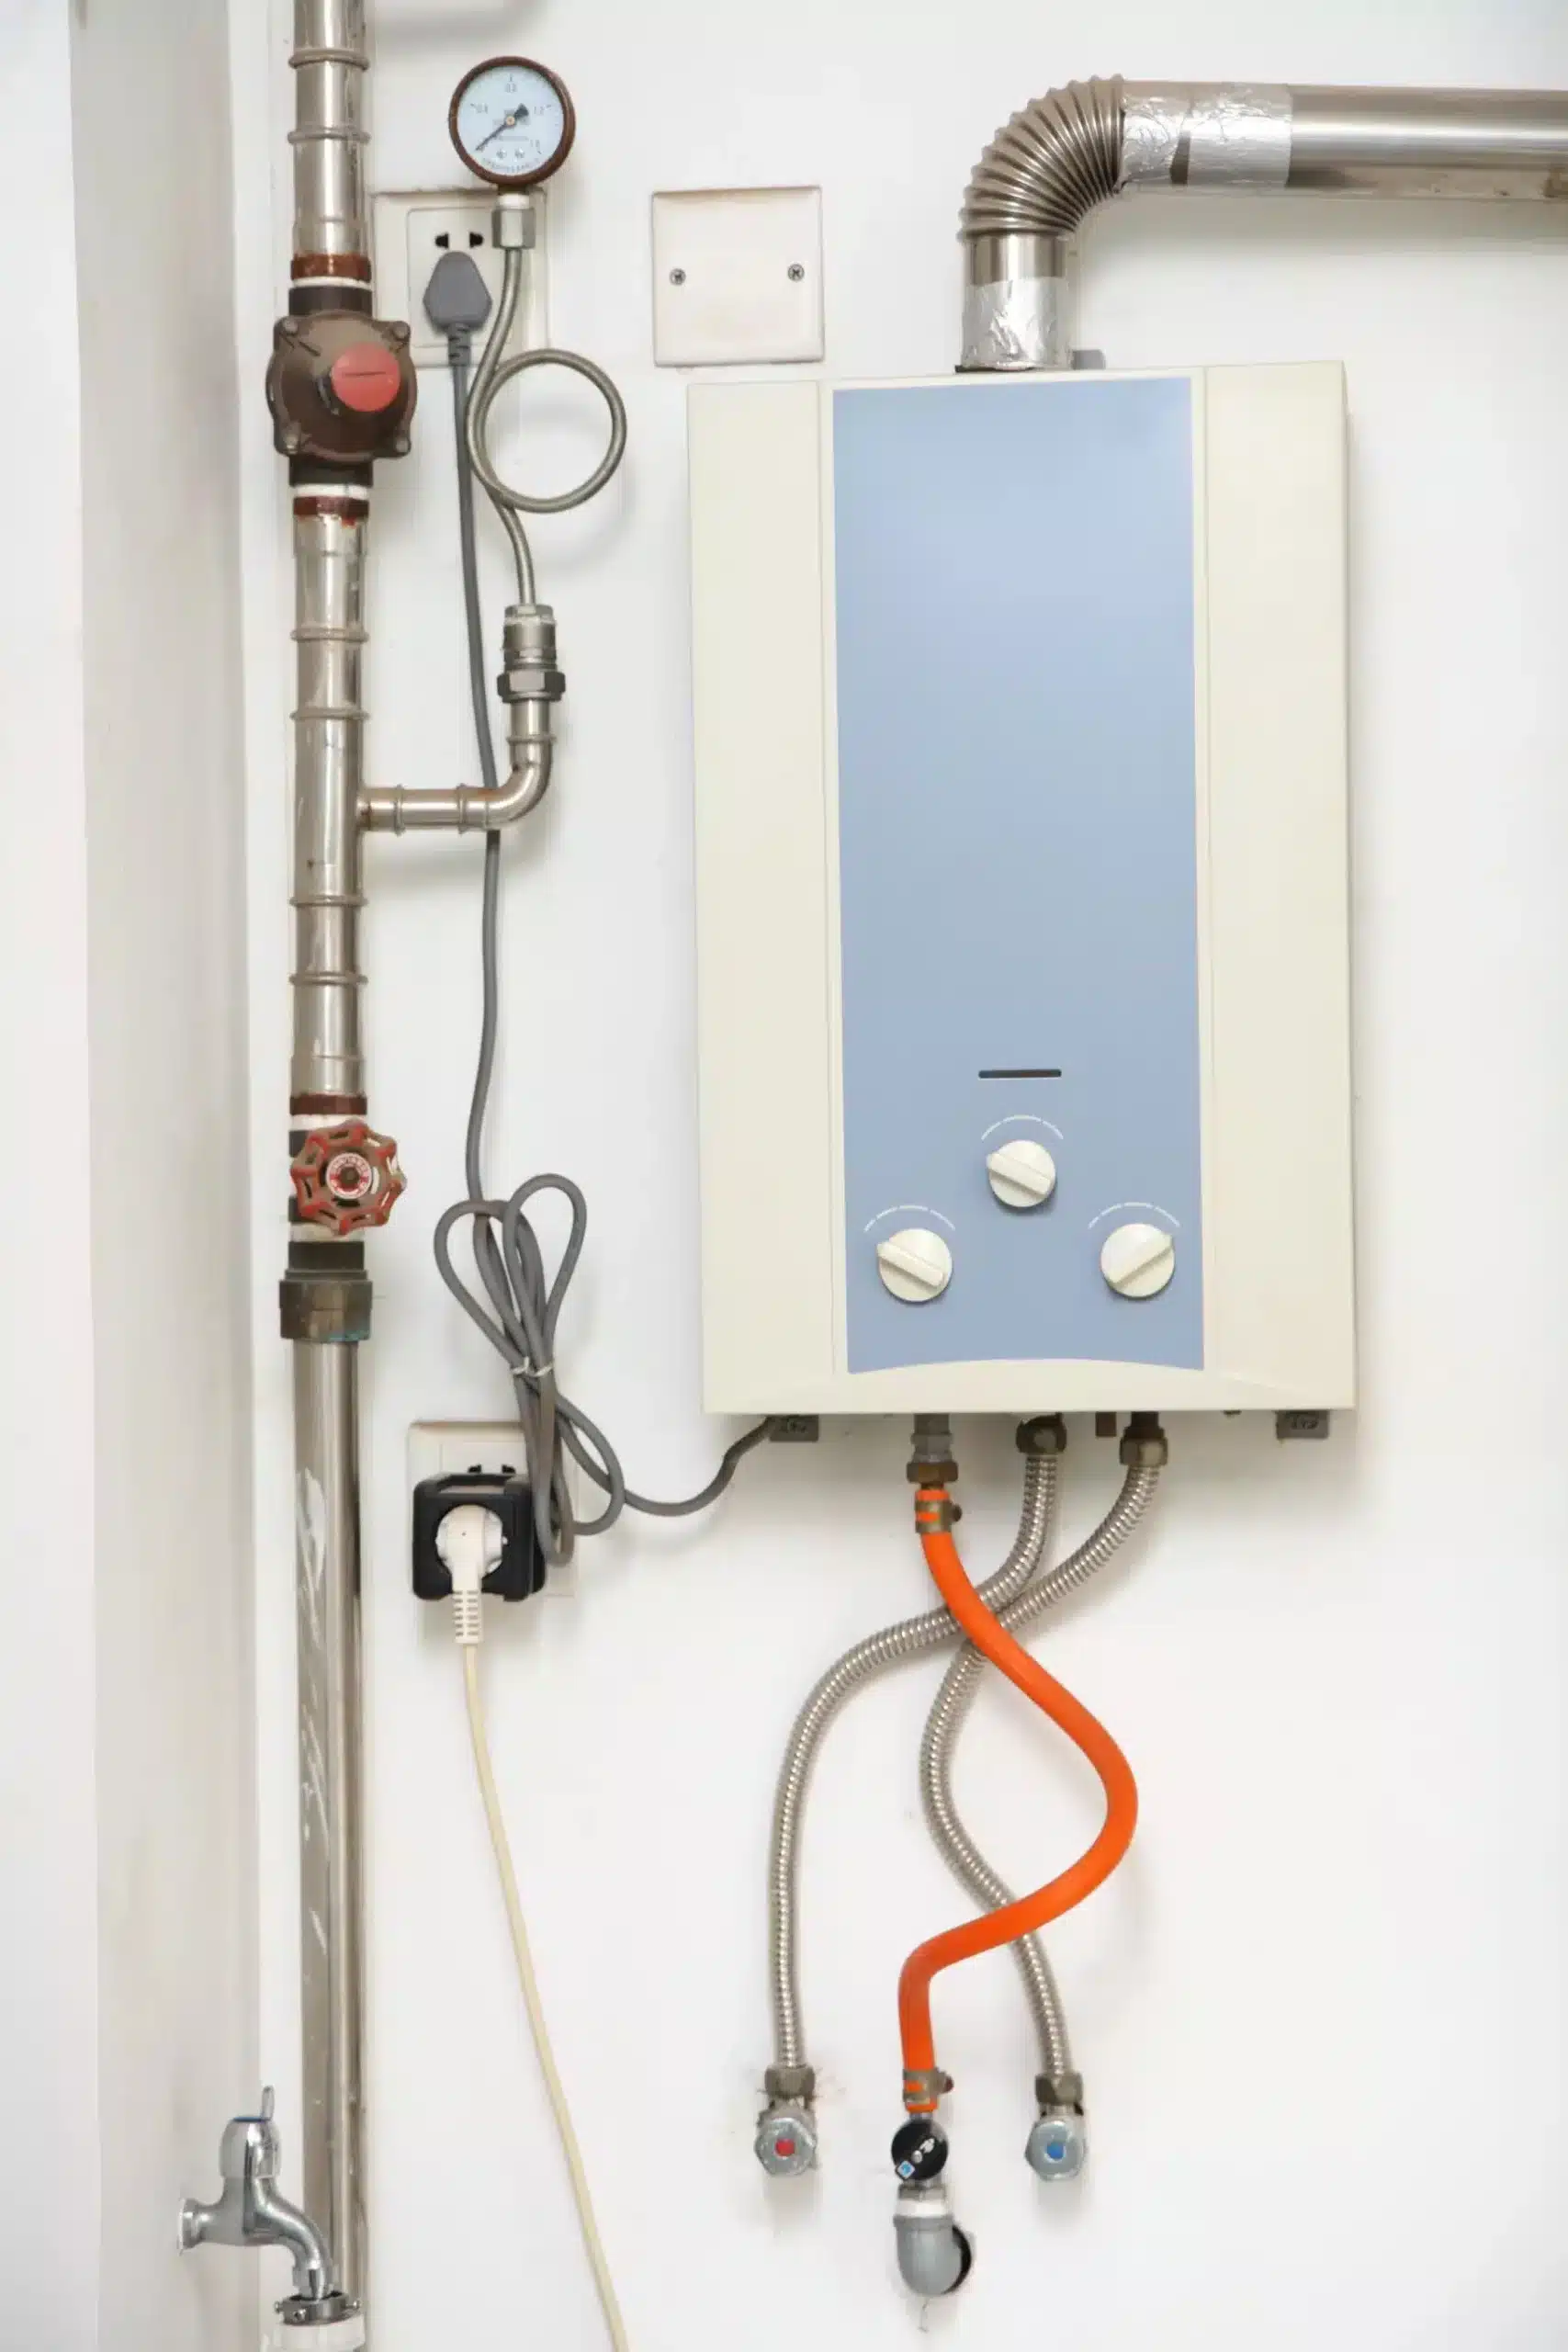 Tankless Water heater Repair 729 Mountain Creek Trail Boerne Texas 78006 scaled 1 scaled